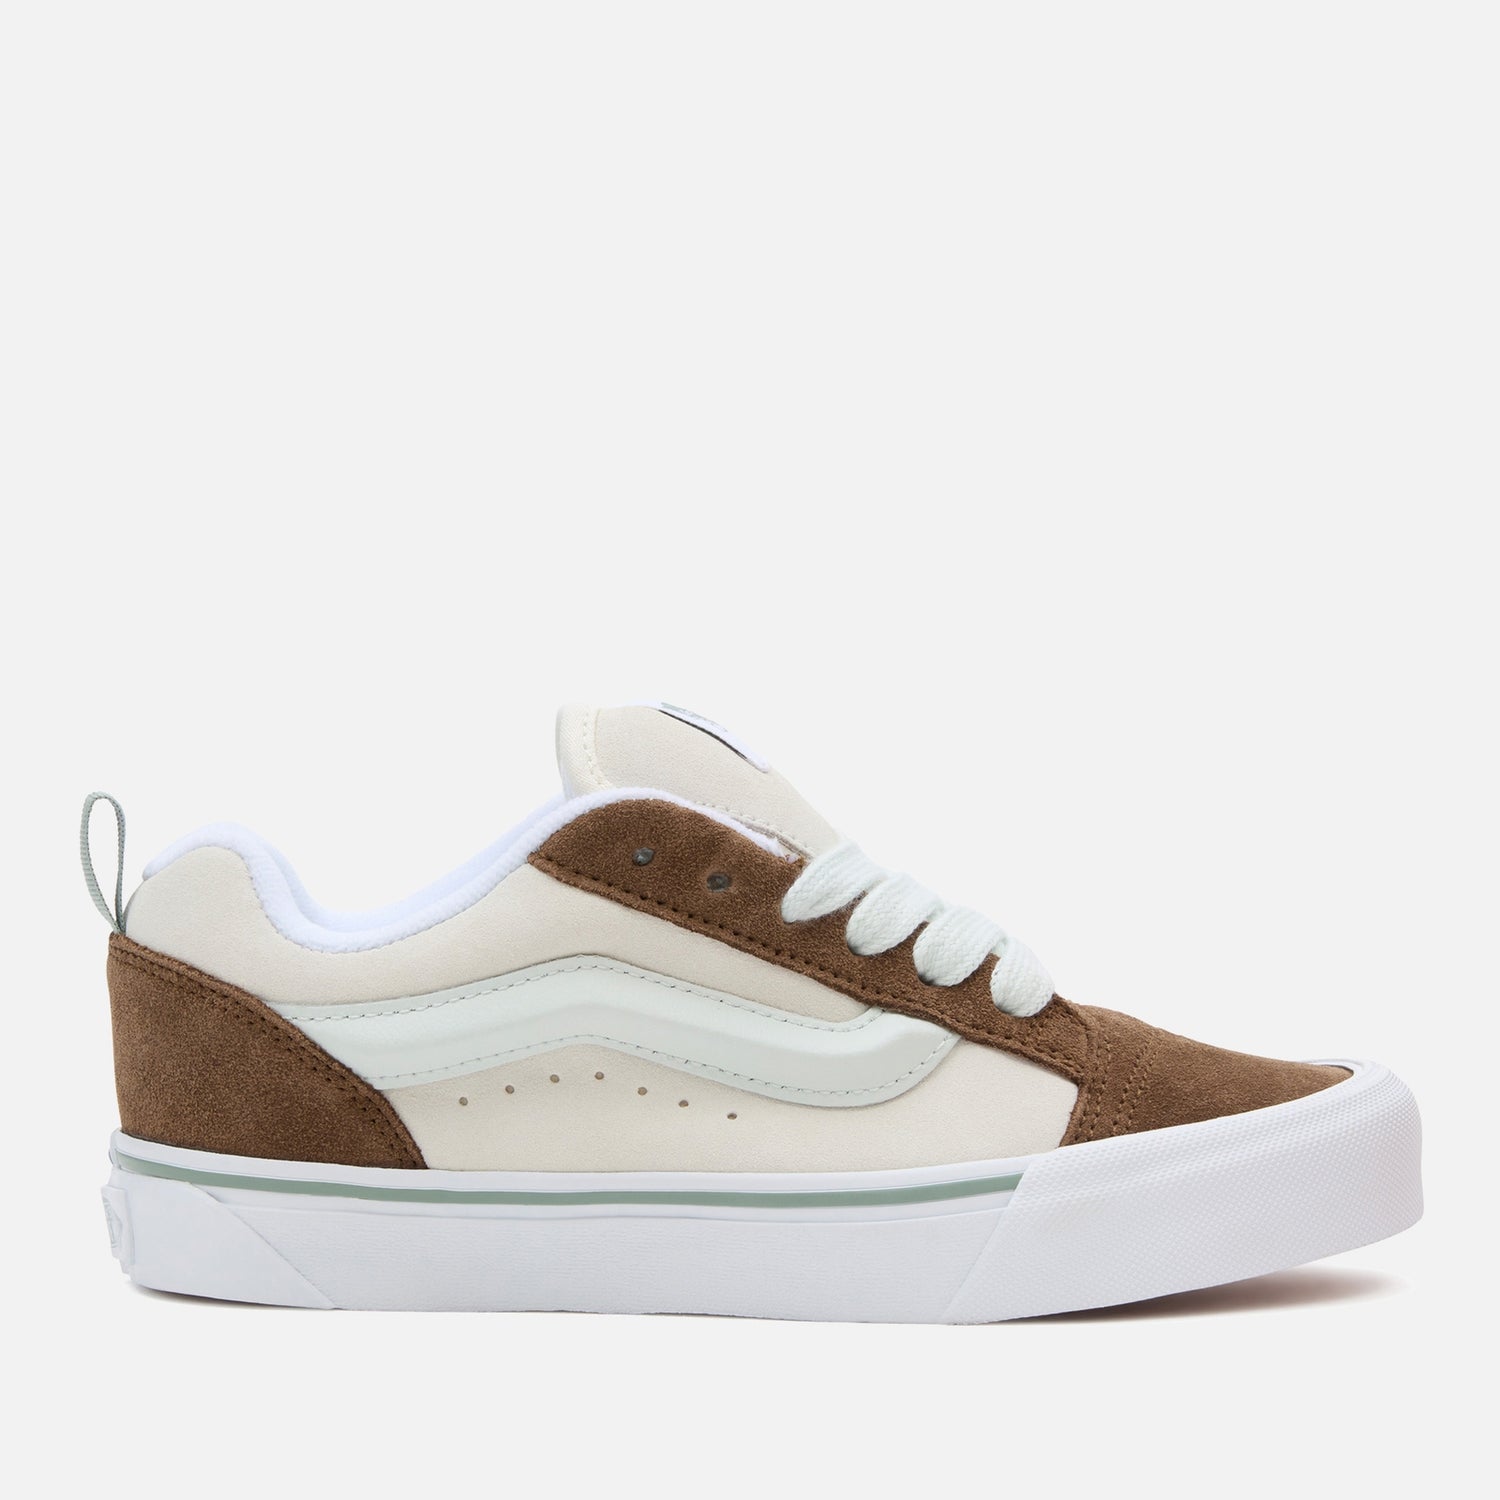 Vans Women's Knu Skool Leather and Suede Trainers - UK 4